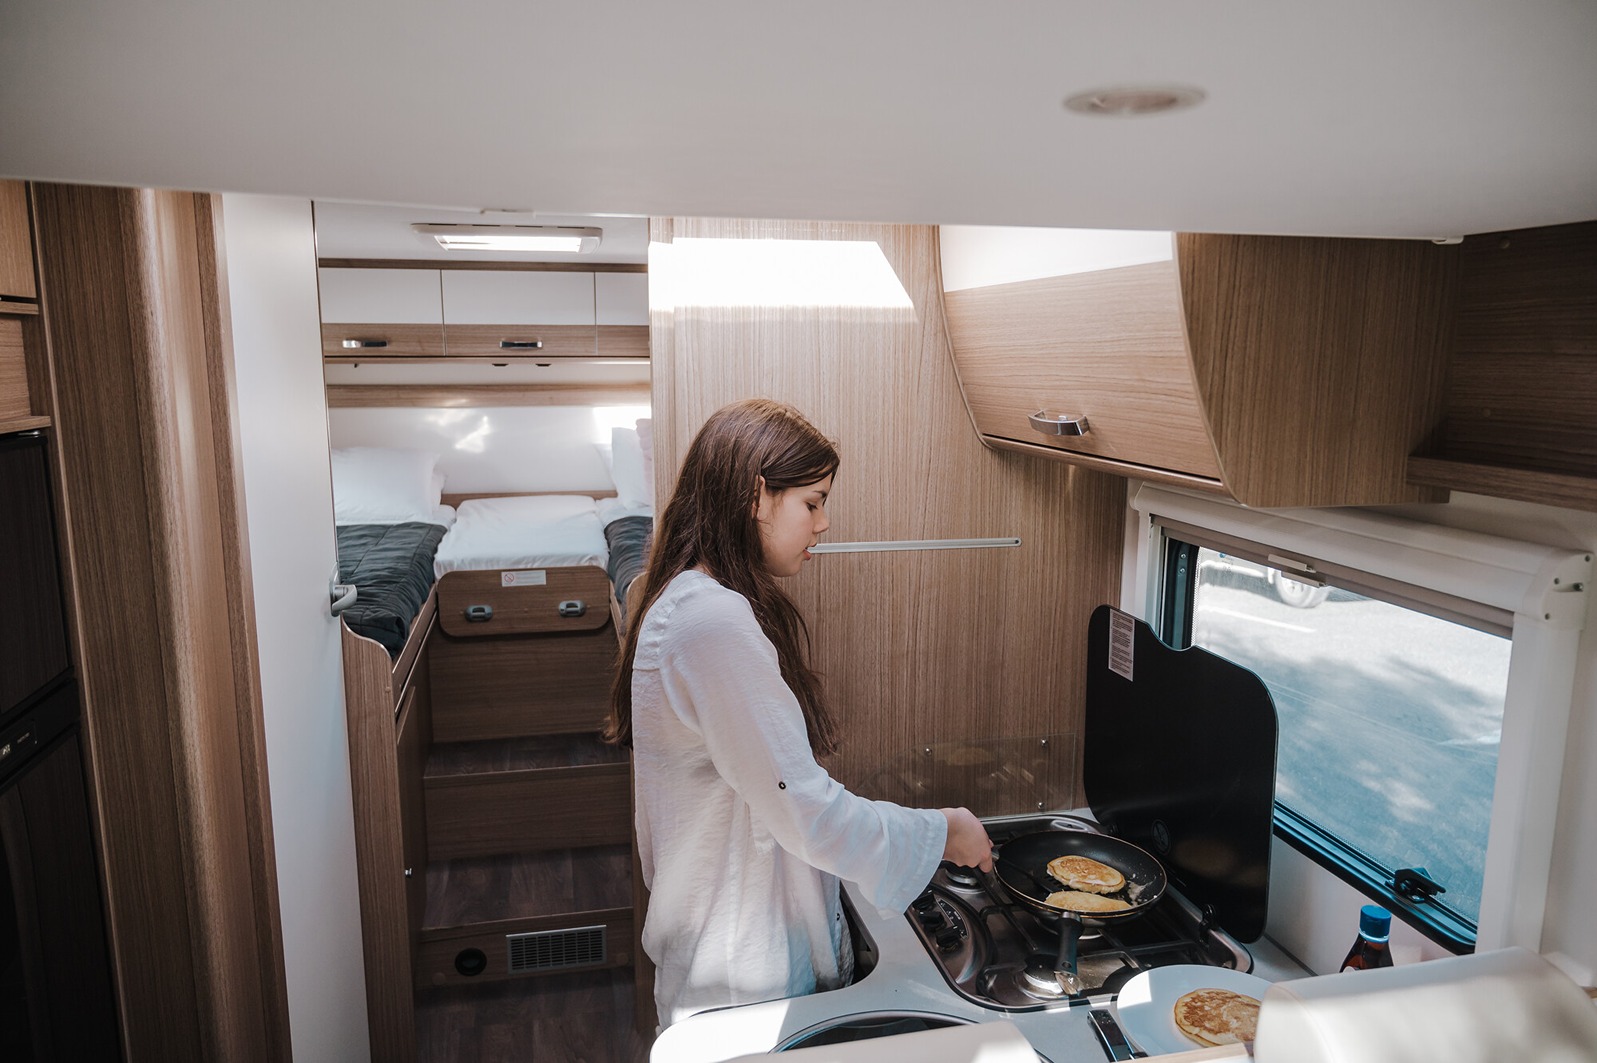 Cooking in a motorhome with good lighting